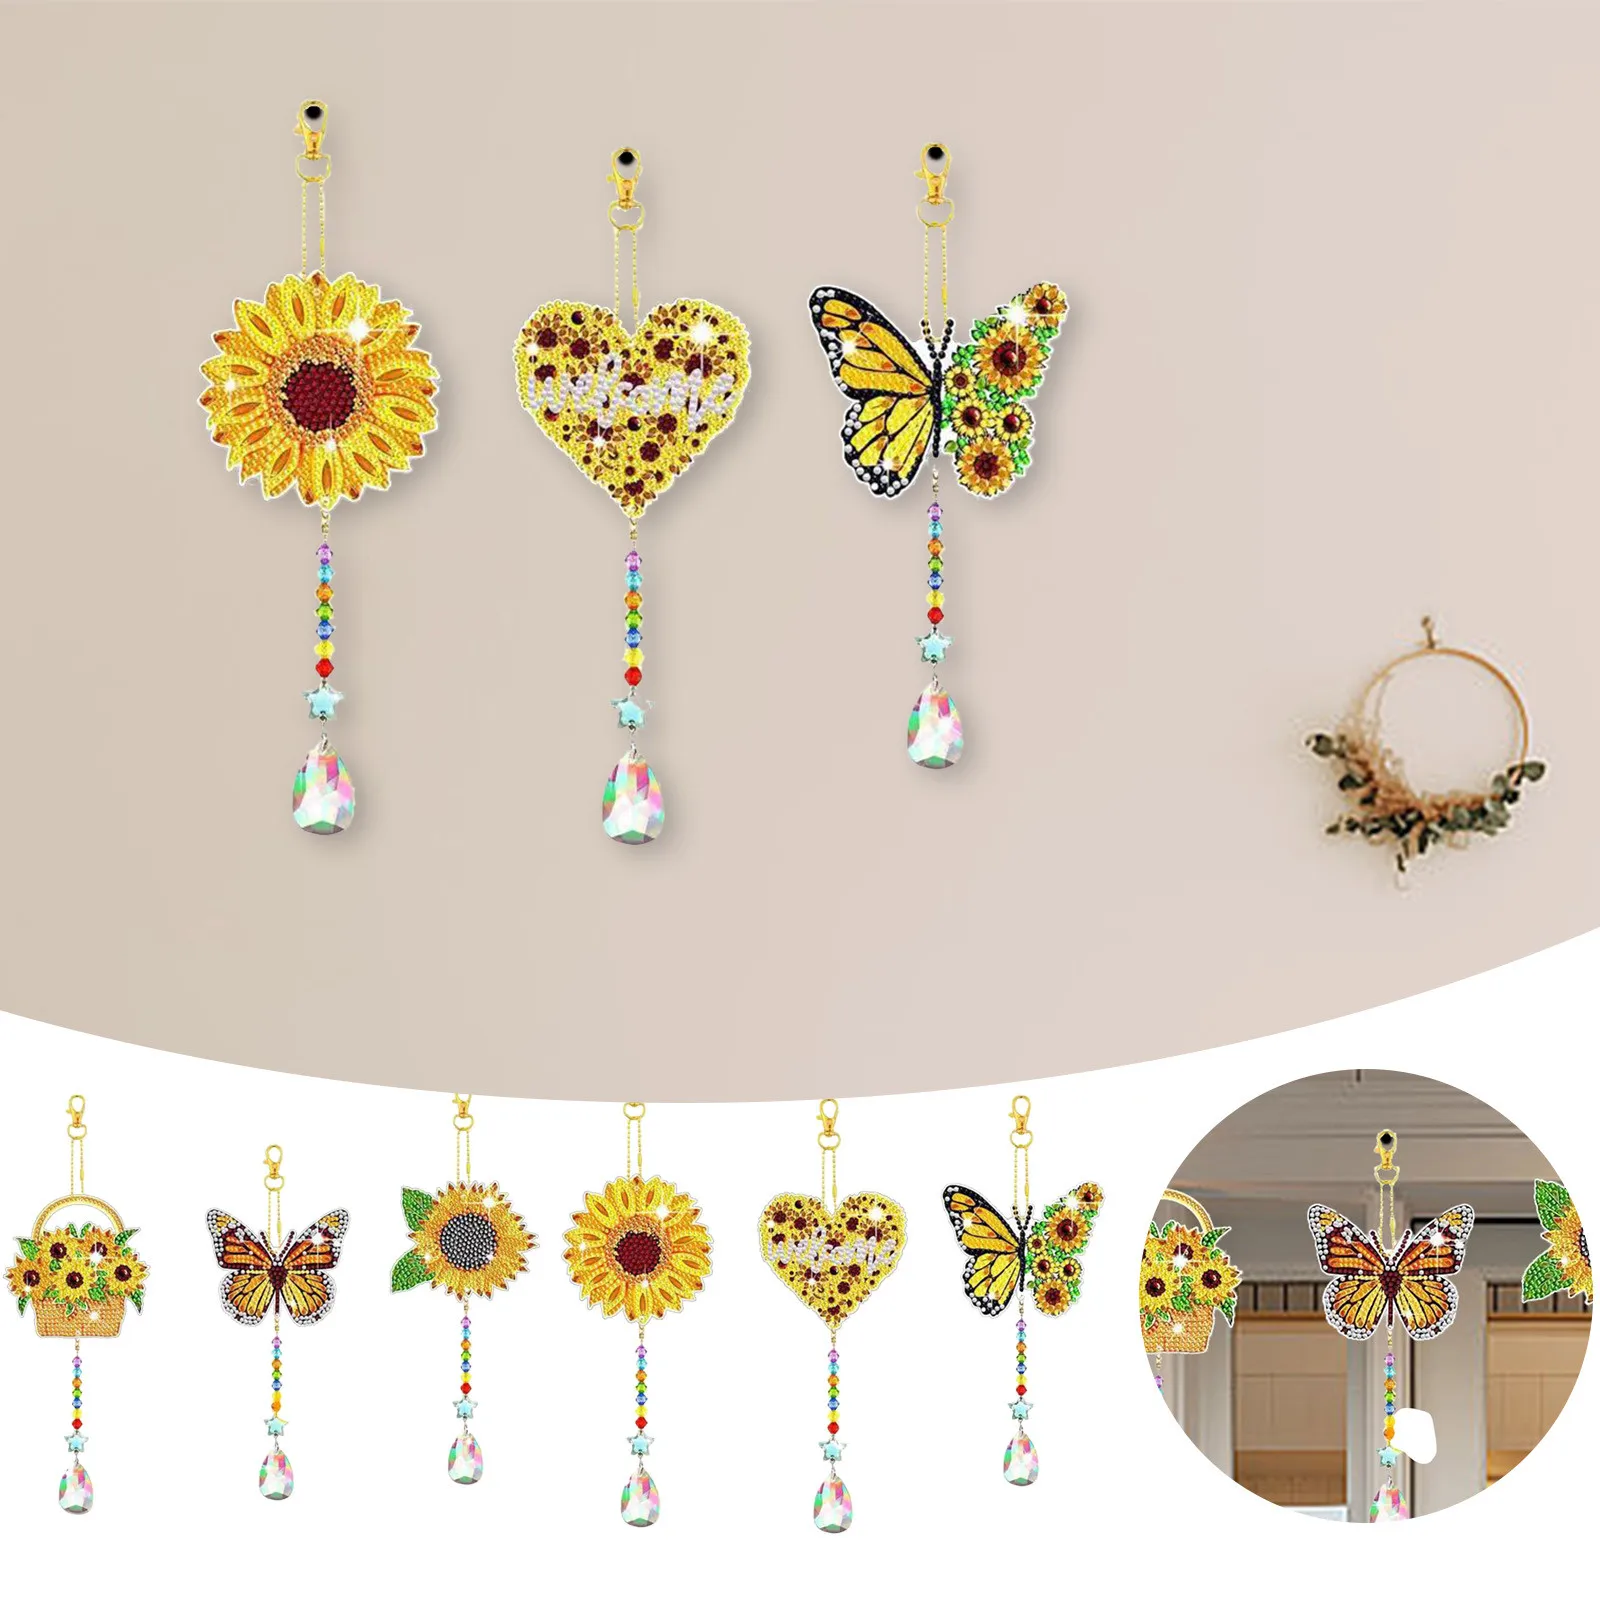 

DIY Butterflies Sun Catcher Wind Chimes Crystal Wind Chime Kit Car Hanging Ornament Crafts For Home Window Decor Party Supplies